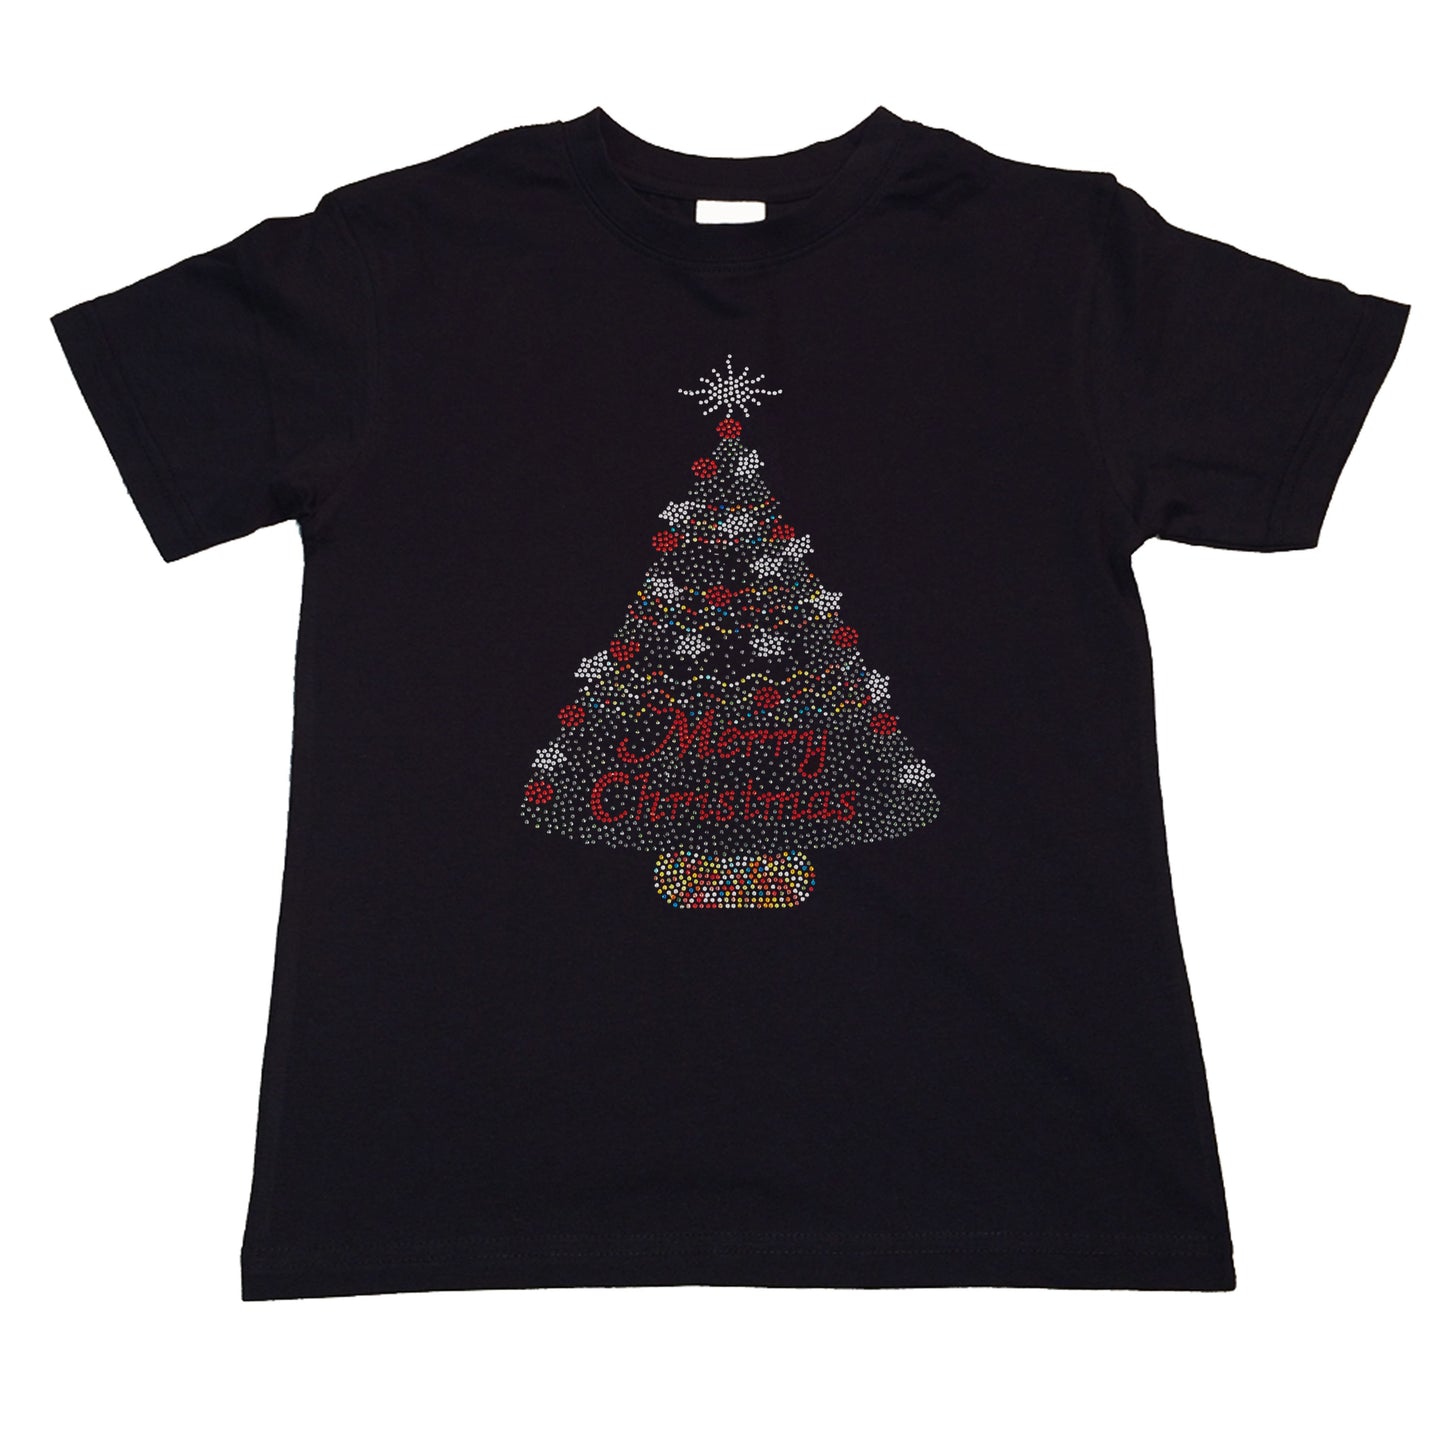 Girls Rhinestone T-Shirt " Merry Christmas Colorful Tree in Rhinestones " Kids Size 3 to 14 Available